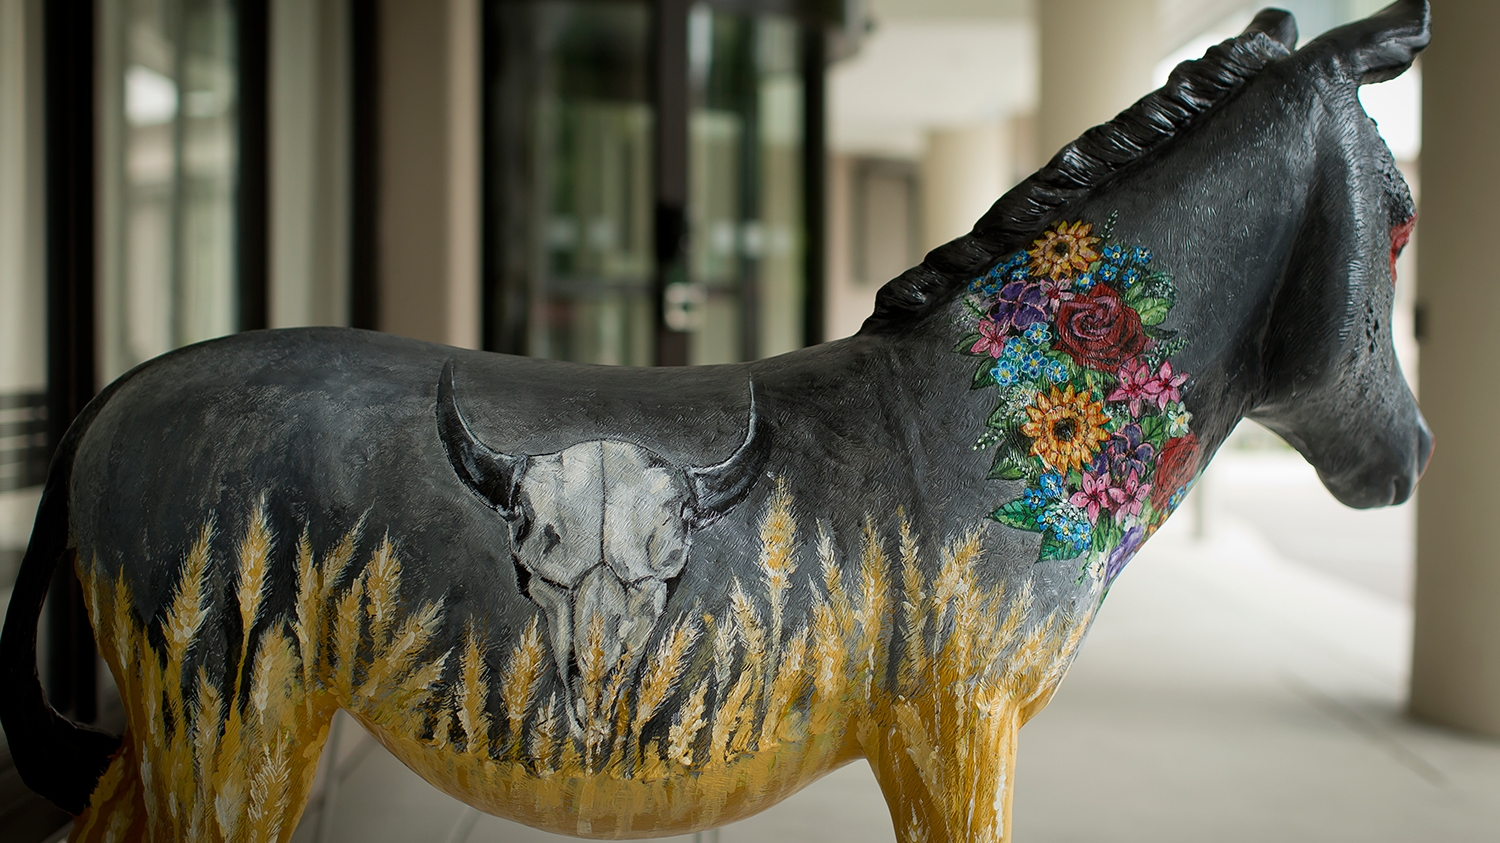 A donkey painted with visual elements representing North Dakota.